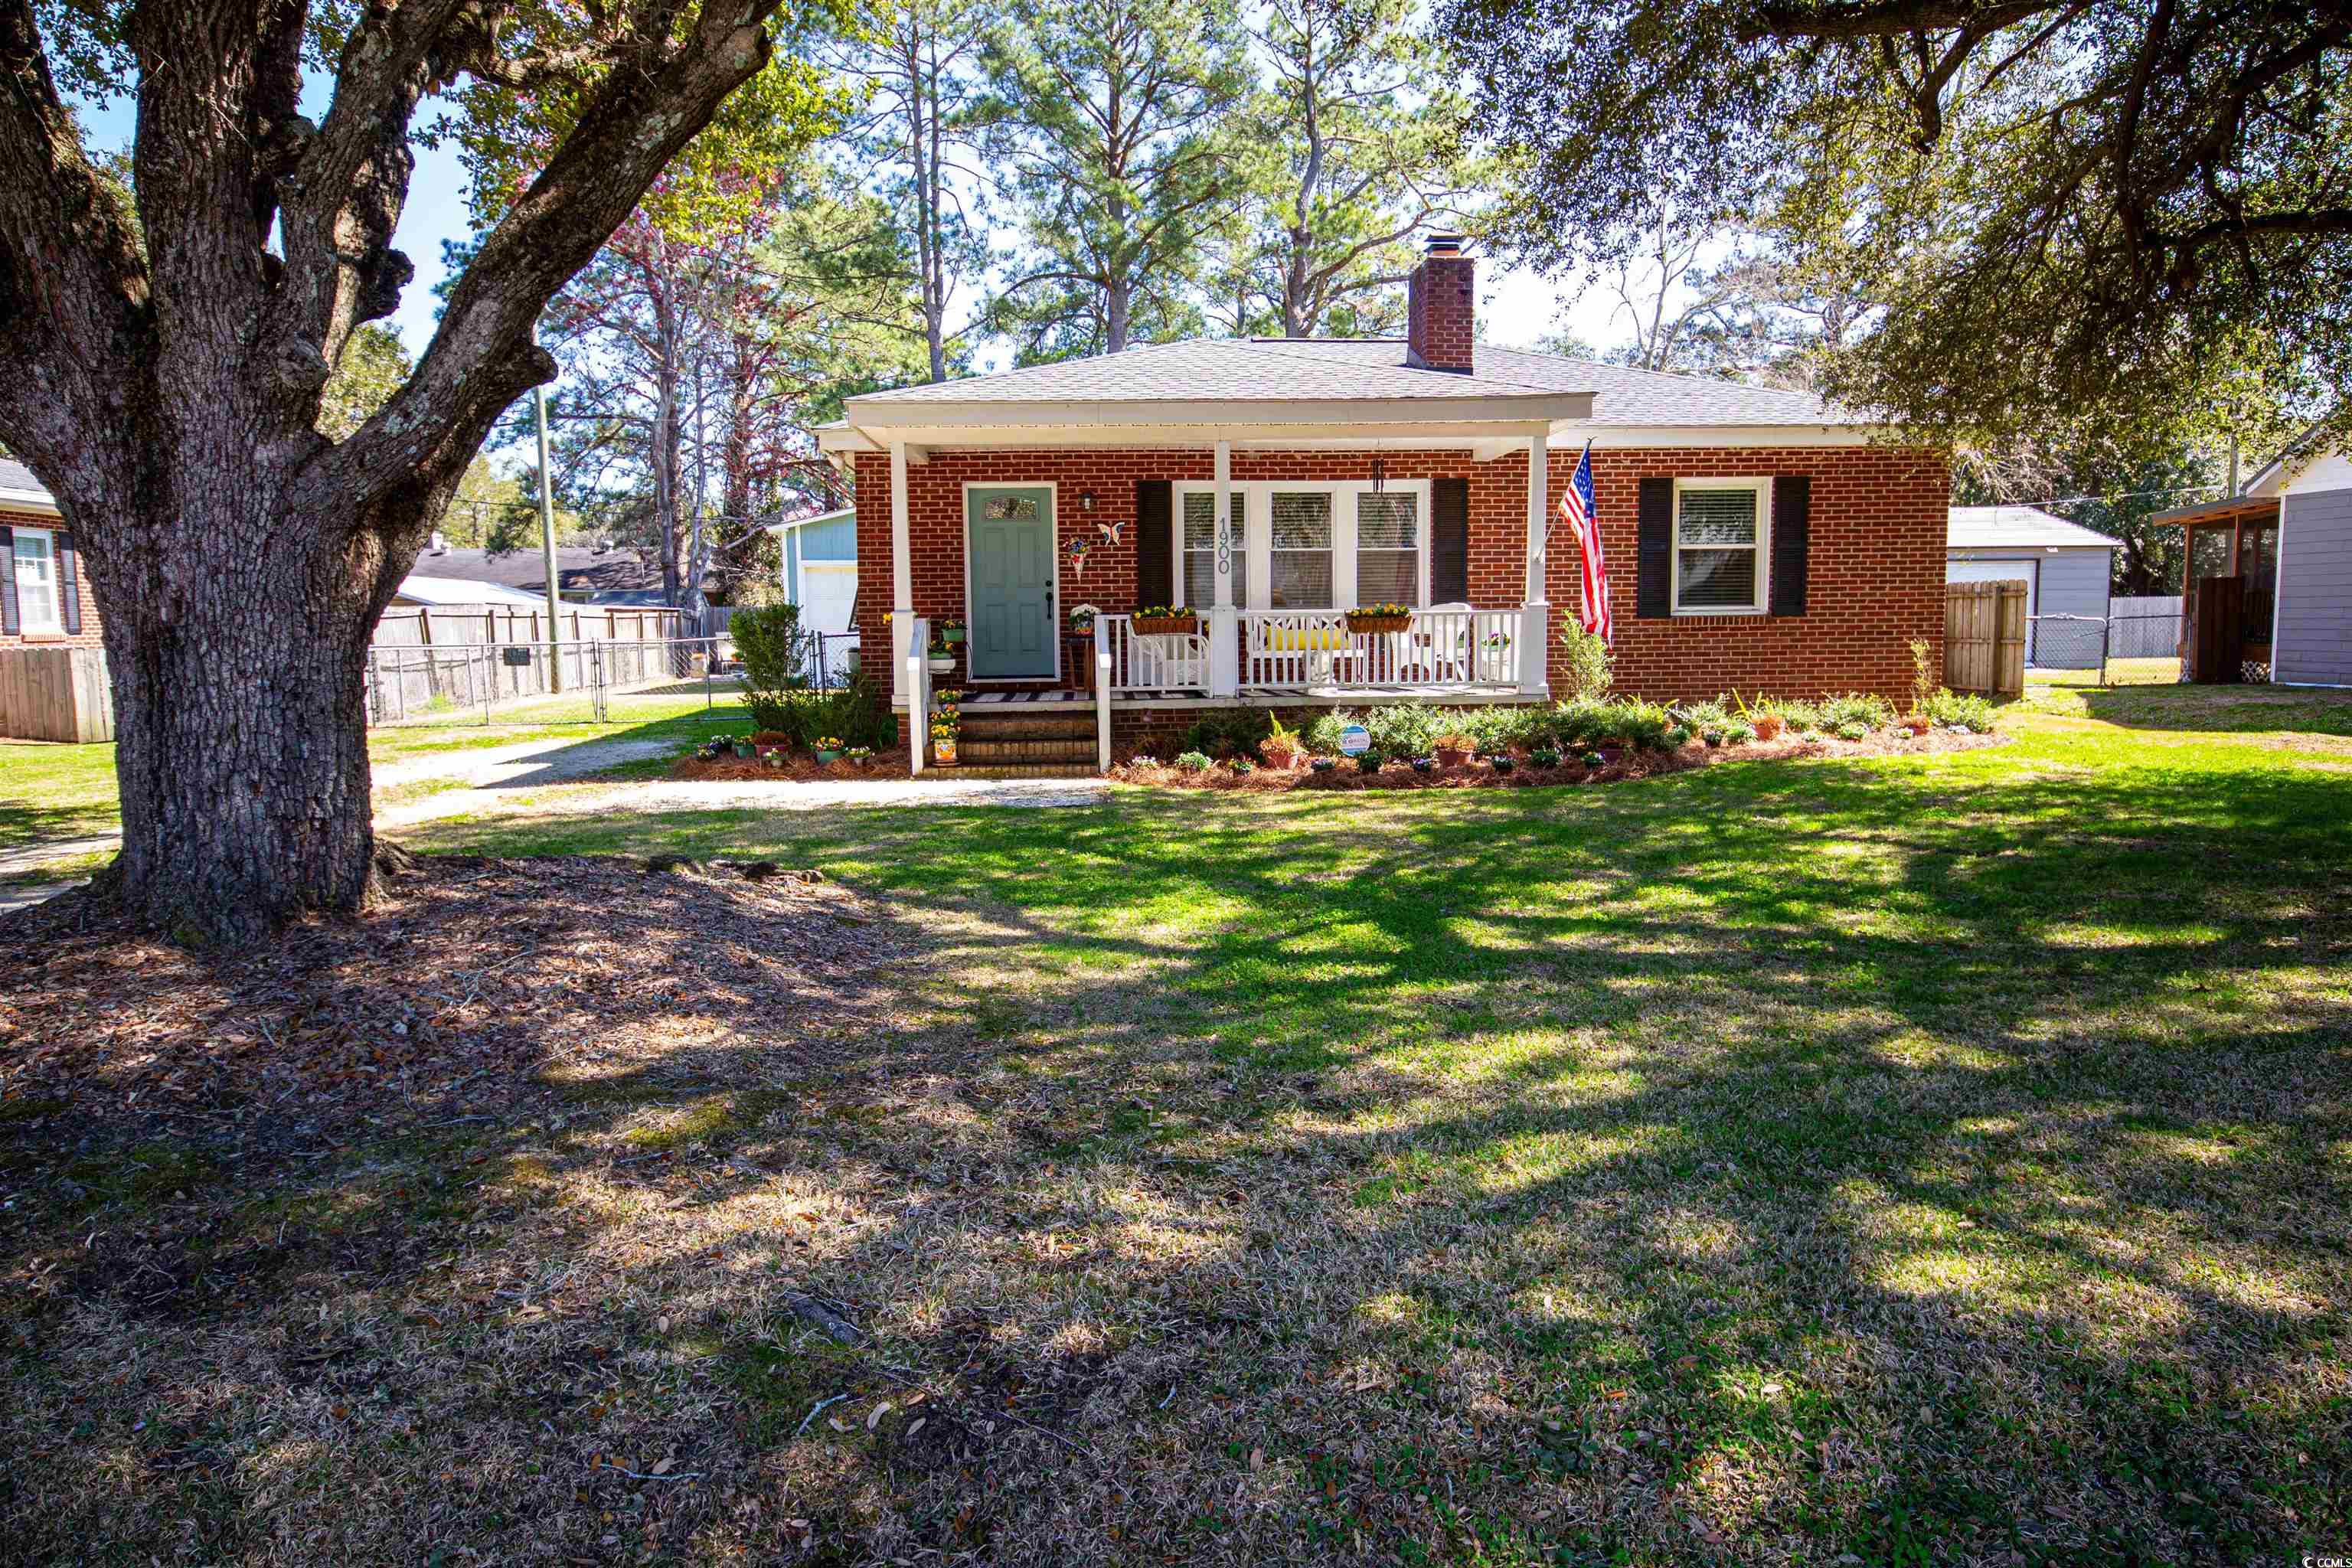 cute remodeled bungalow style home here in the kensington area of historic georgetown, south carolina - 1900 jasper street.  all brick three bedroom, one bath home that was thoughtfully restored in 2018 including roof, crawl space encapsulation, laminate floors throughout, neutral paint colors and so much more!  outside there is a spacious covered front porch overlooking the yard shaded by a tremendous live oak, fenced back yard with patio area, new bahama shutters, and a large detached garage offering tons of storage and workshop space.  the great room/dining area has a large picture window and fireplace with classic dental molding and opens into the kitchen area with new white cabinets, shelving, new stainless ge appliances, and new full size stacked washer / dryer.  the bathroom has a custom vanity with dual bowl sinks, decorative tile floors and subway tile in the tub/shower combination.  this home is tastefully decorated and exudes a calm and welcoming feeling.  be sure to make an appointment to see this cozy home! short drive to georgetown’s waterfront harbor walk with wonderful restaurants, shopping, and fresh seafood vendors. close to numerous boat landings, twelve miles from pawleys island and a located on the hammock coast half way between charleston and myrtle beach.  *buyer responsible for verifying square footage and hoa details.